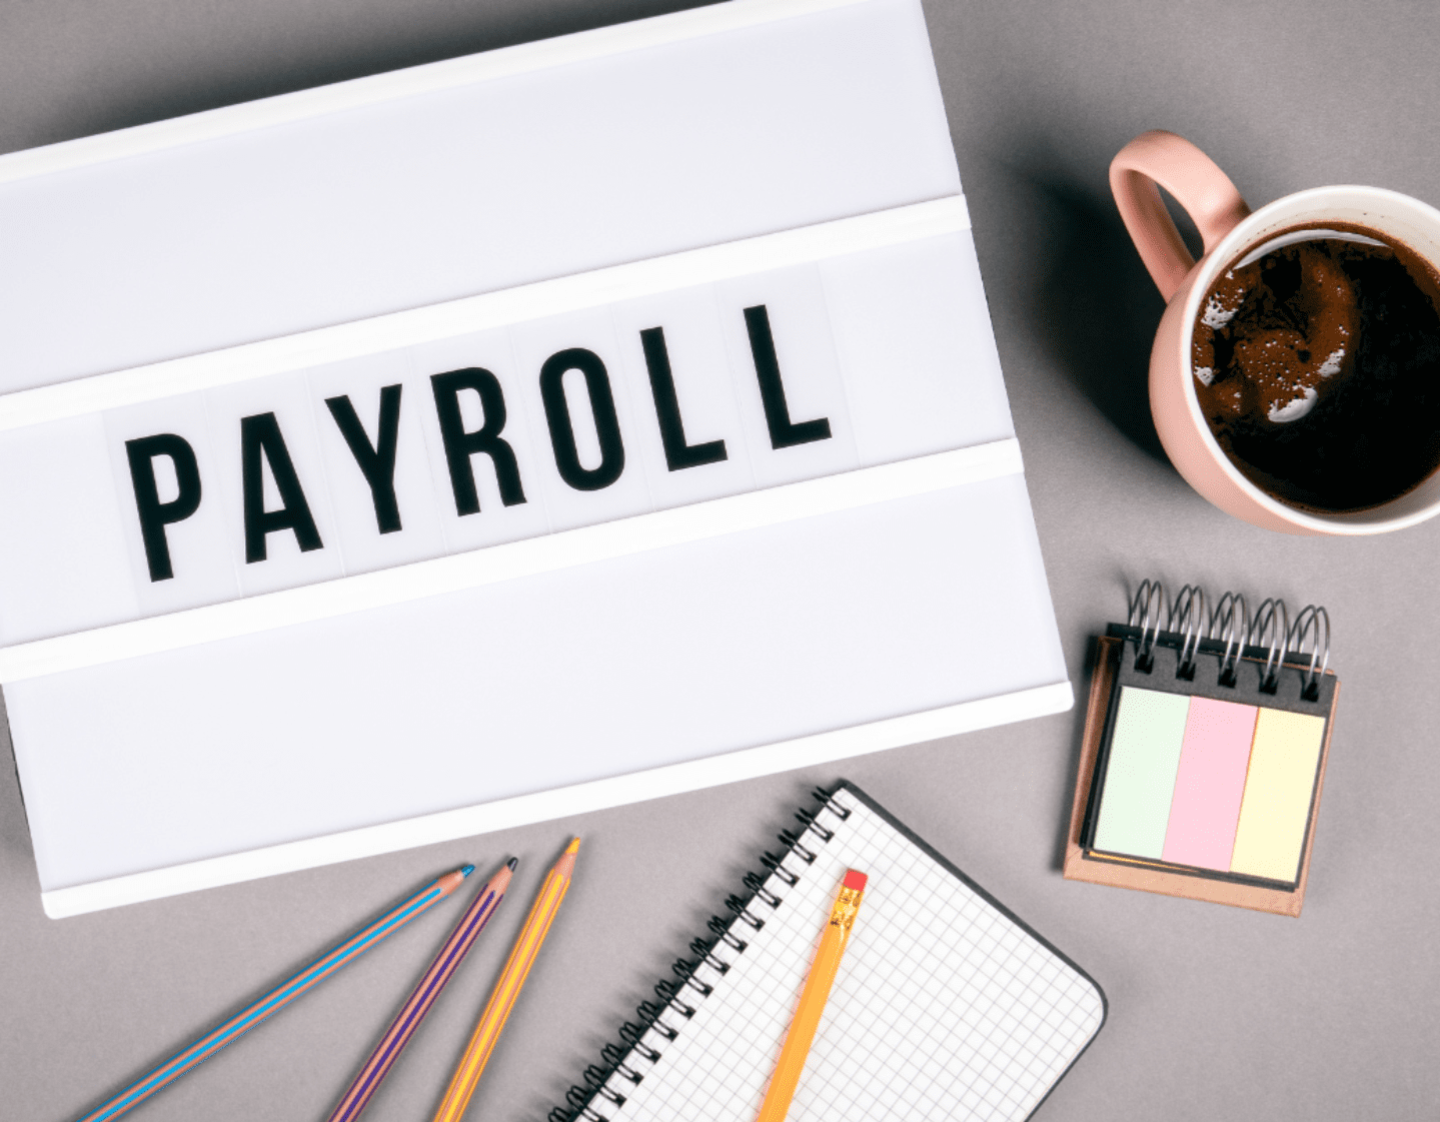 A lightbox with the word "Payroll" on it, on a desk with a coffee cup and stationairy 